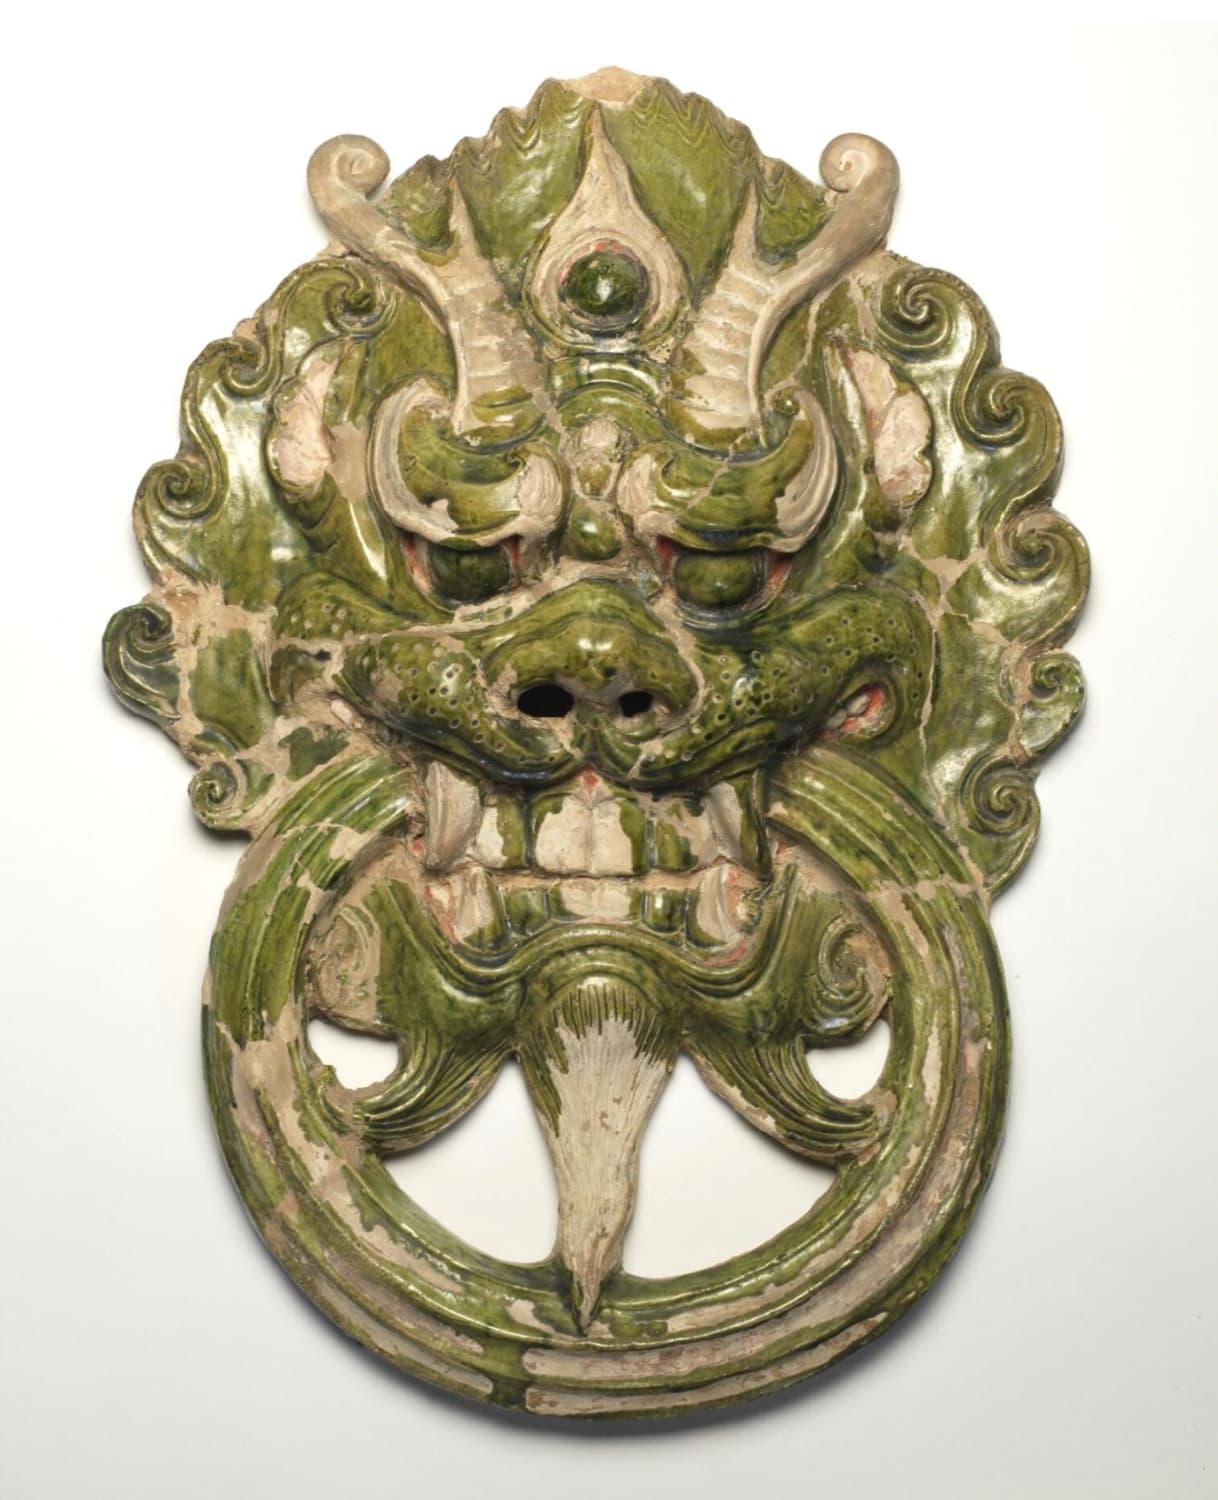 Ceramic tomb ornament shaped like a dragon head holding a ring. China, Tang dynasty, 618 - 906